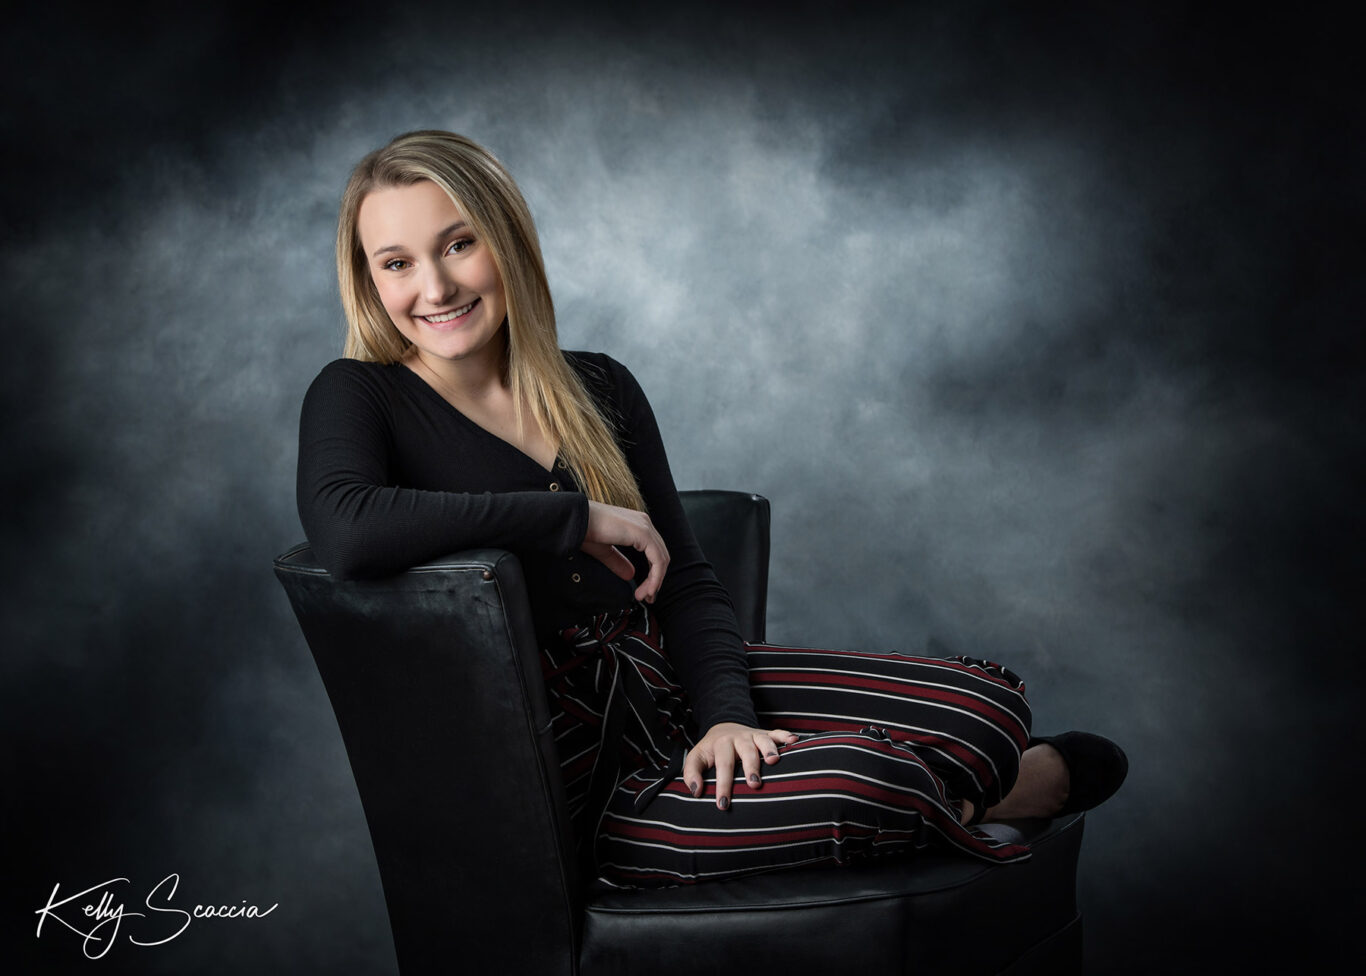 High School senior girl sitting in a chair in a studio portrait while smiling